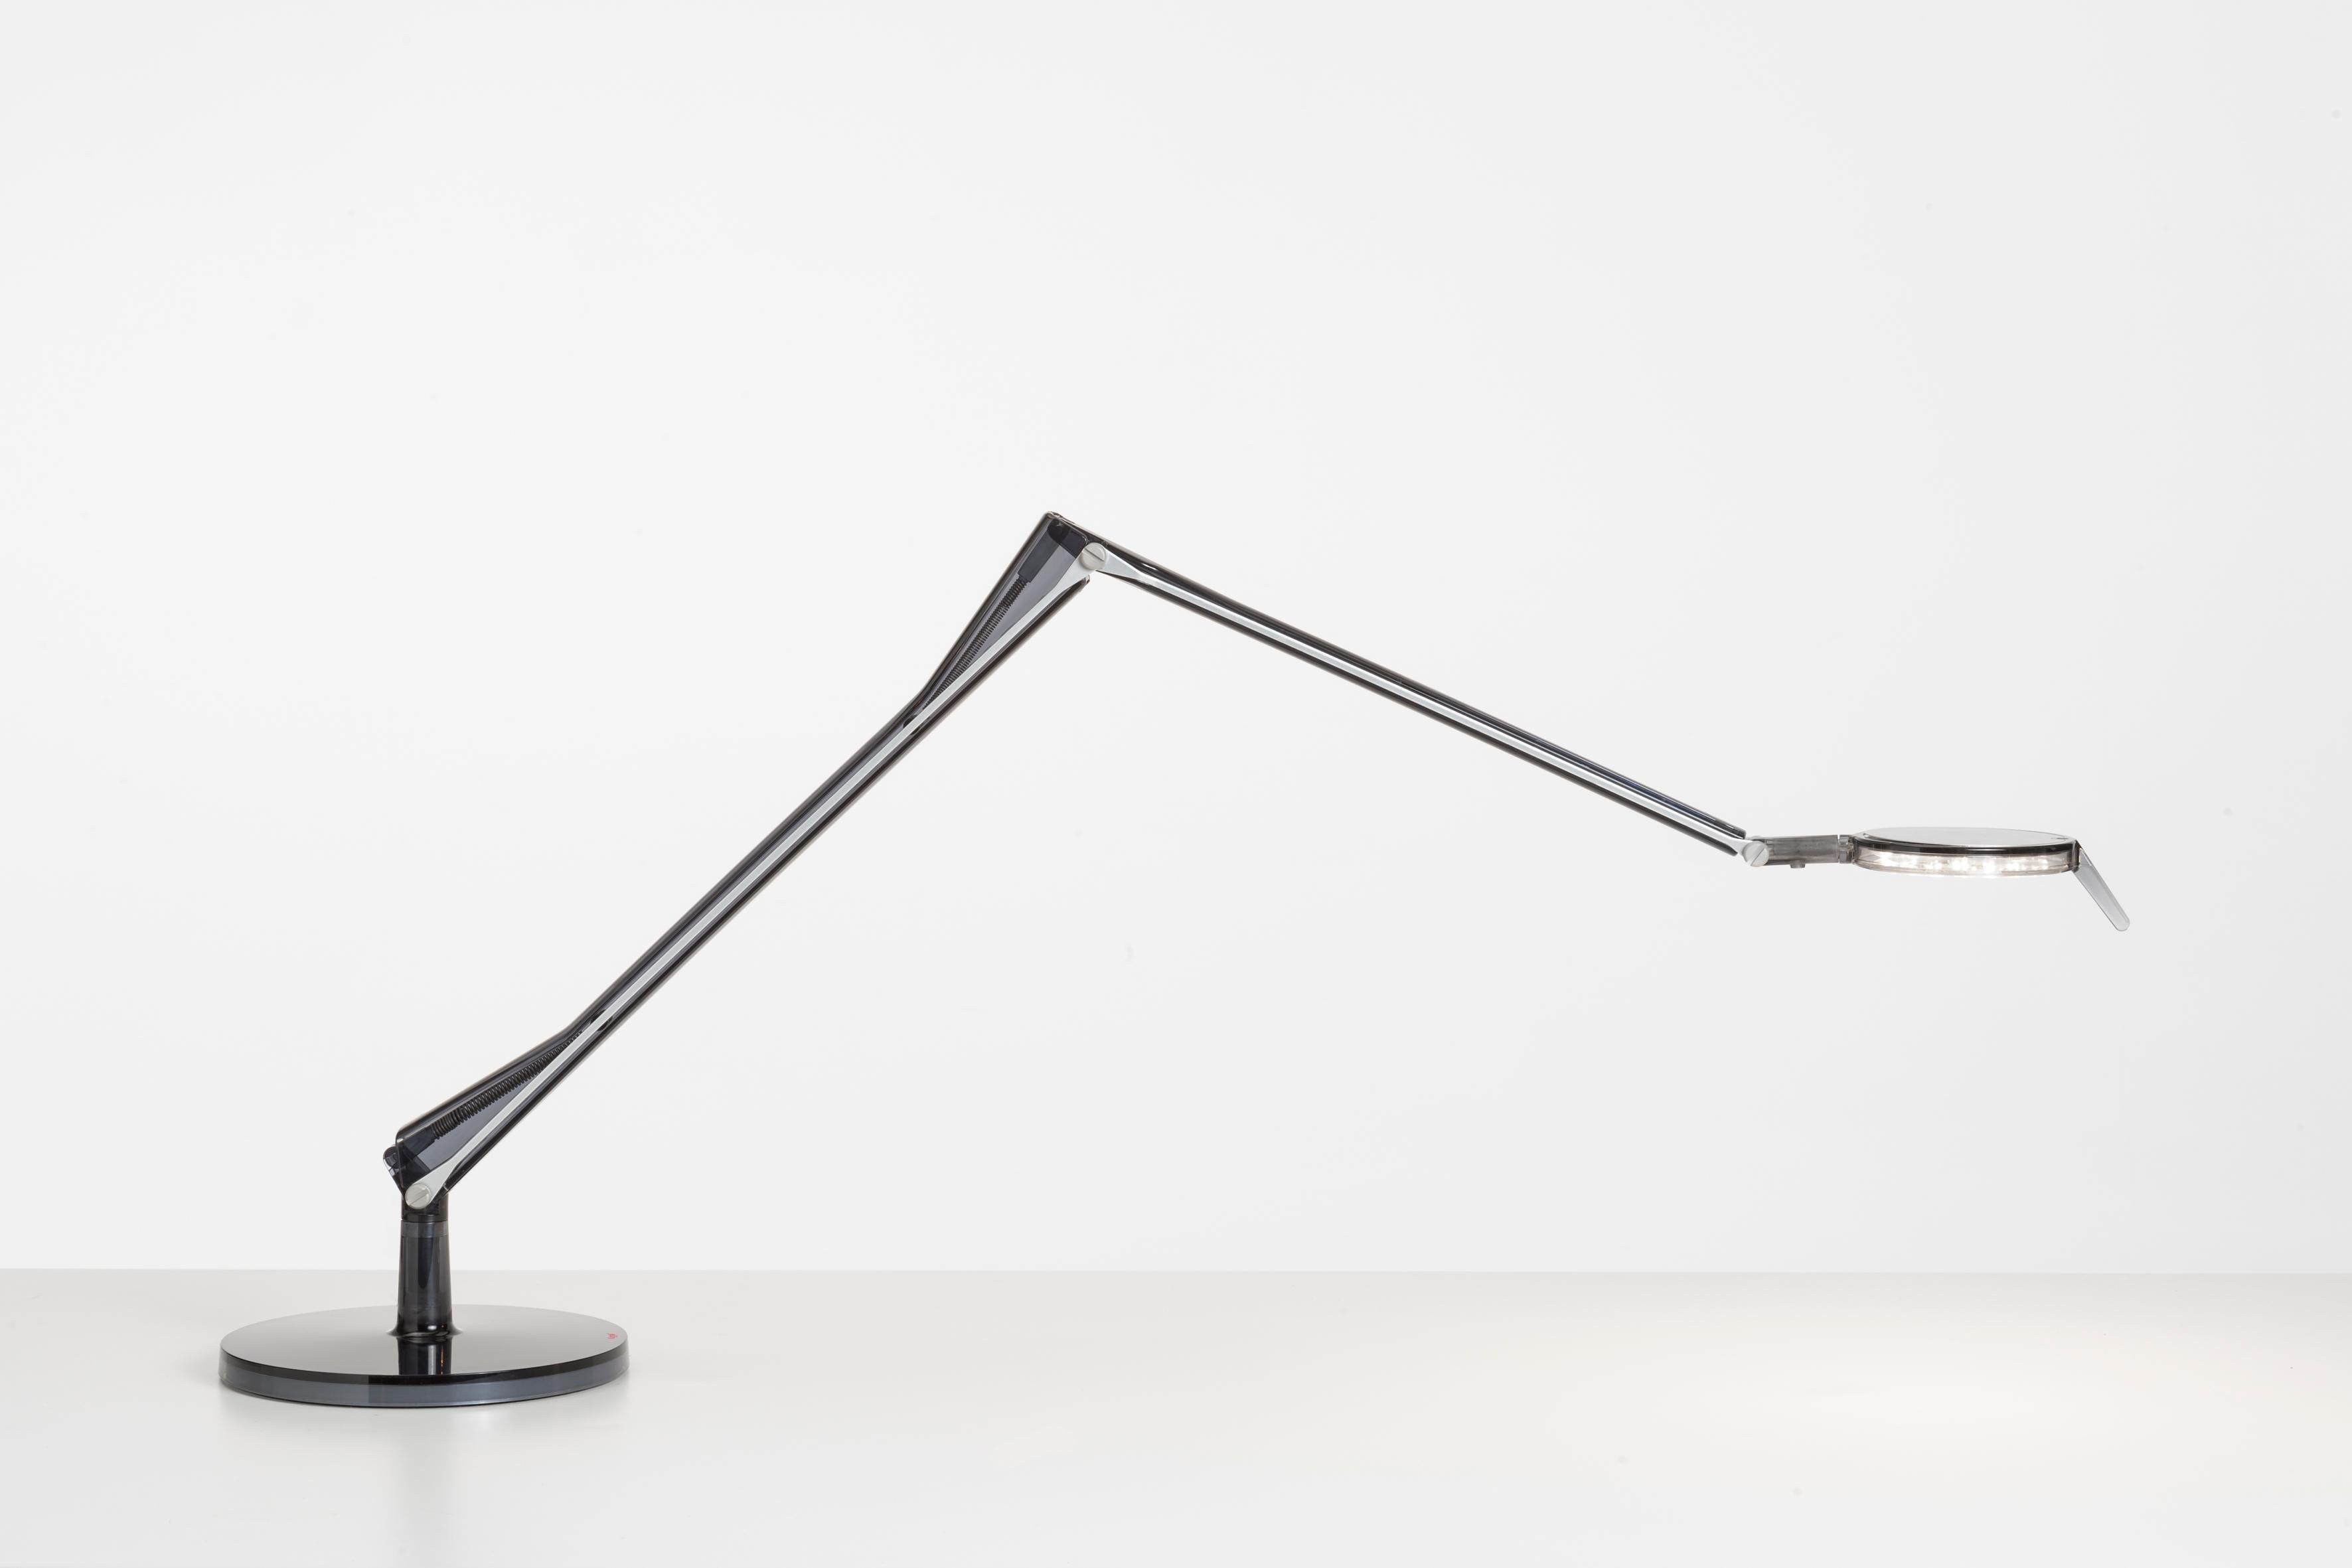 Aledin Tec has a flat head which throws a direct luminous beam and is also adjustable thanks to the movement of the diffuser itself. These characteristics make it suitable for office use. The luminous beam throws a wider and more atmospheric light